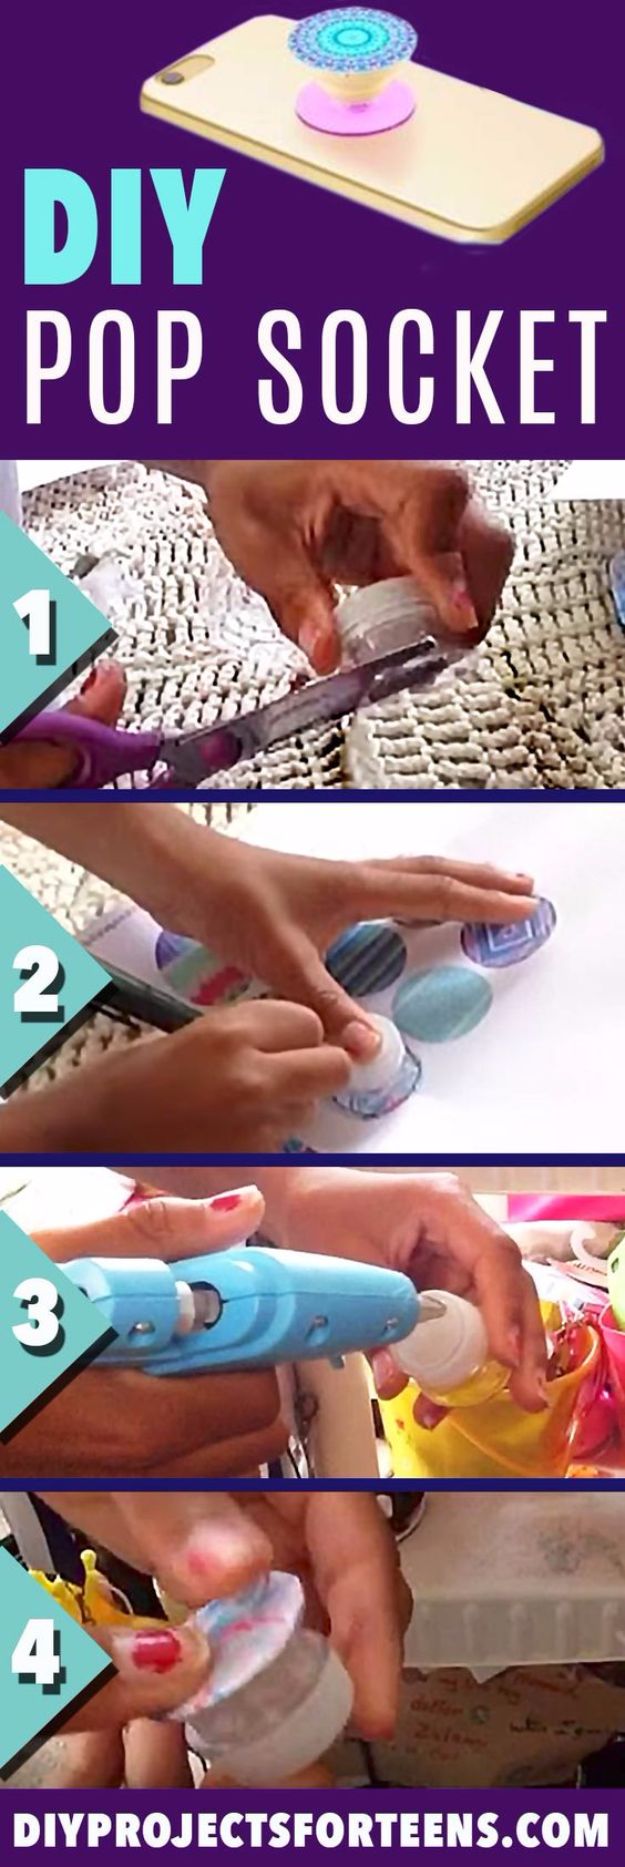 Cheap Crafts for Teens - DIY Pop Socket - Inexpensive DIY Projects for Teenagers and Tweens - Cute Room Decor, School Supplies, Accessories and Clothing You Can Make On A Budget - Fun Dollar Store Crafts - Cool DIY Gift Ideas for Christmas, Birthdays, BFF gifts and more - Step by Step Tutorials and Instructions #cheapcrafts #dollarstorecrafts #teencrafts #dollartreecrafts